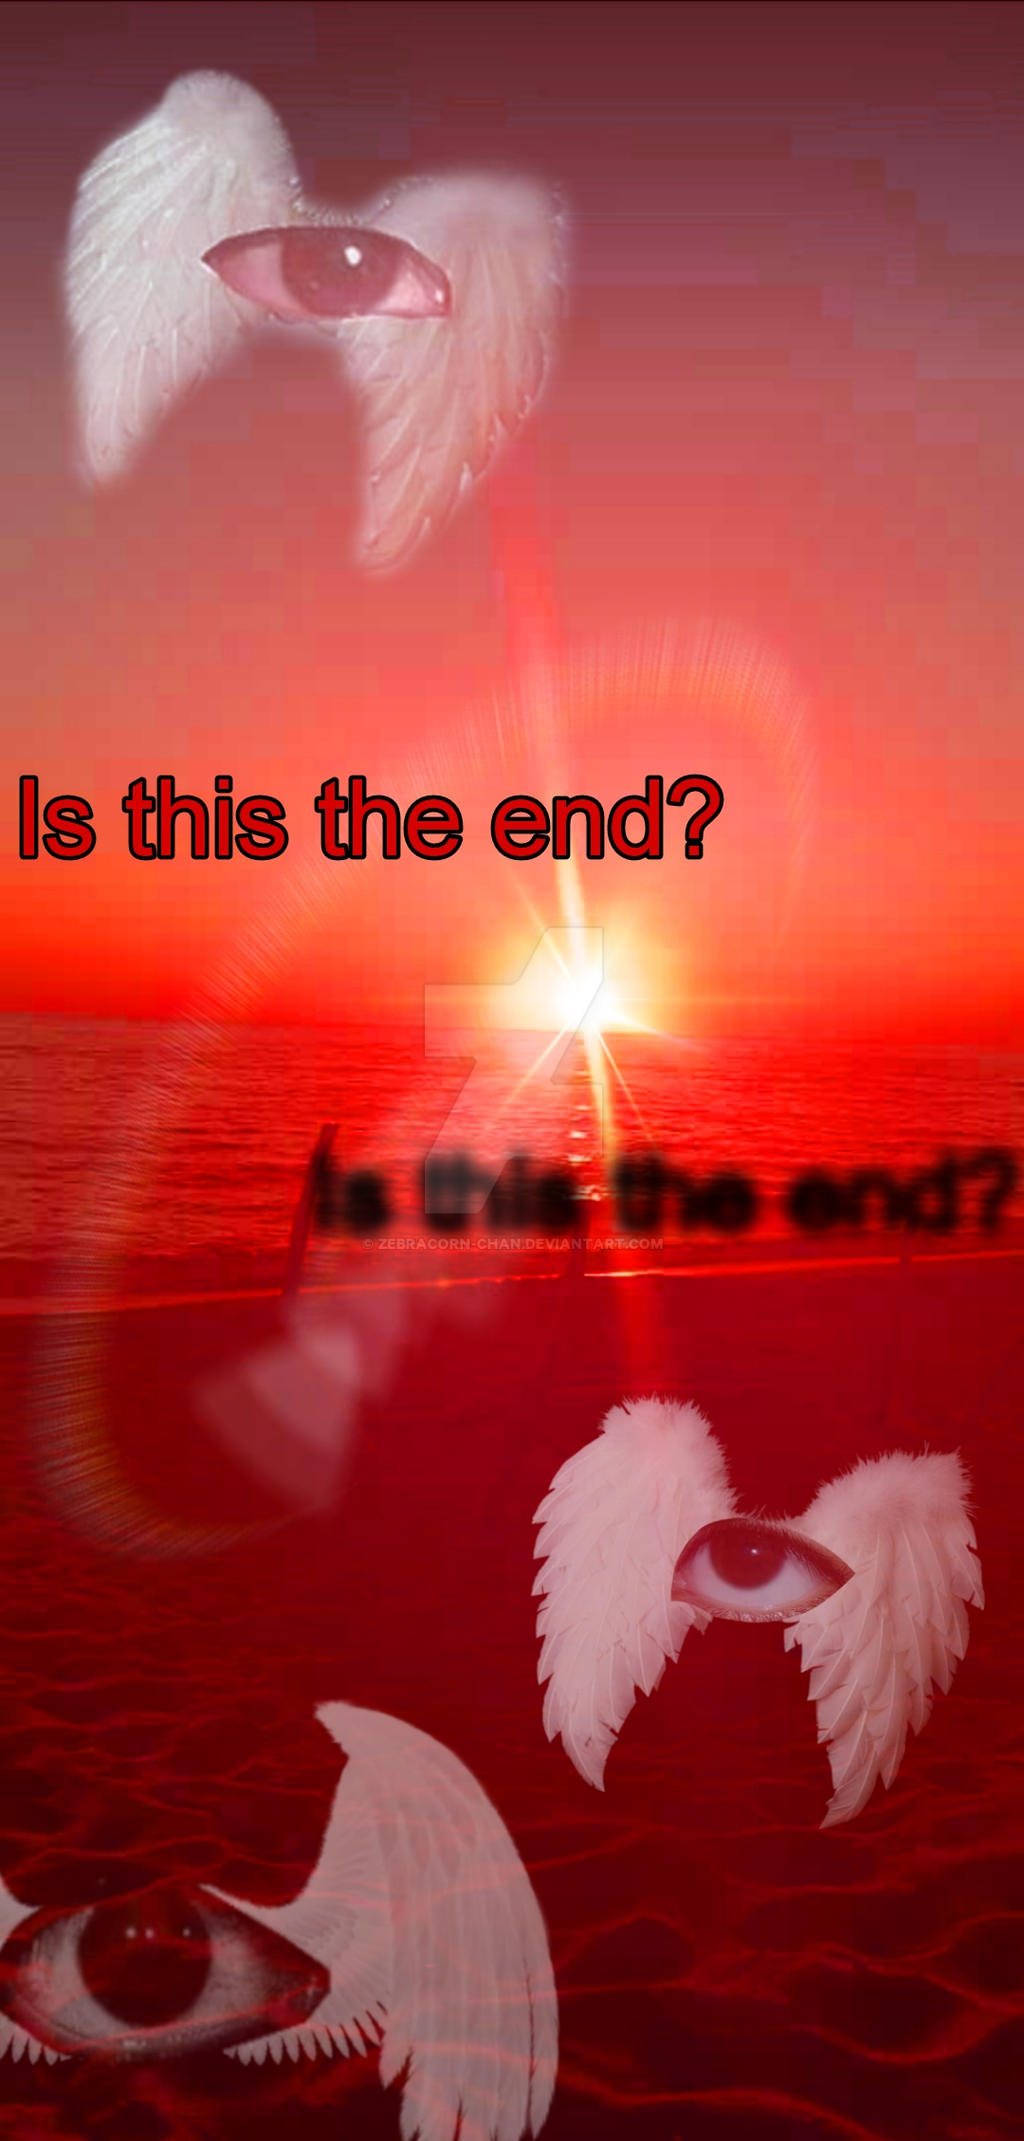 Weirdcore Aesthetic - Is this the end? by Zebracorn-chan on DeviantArt